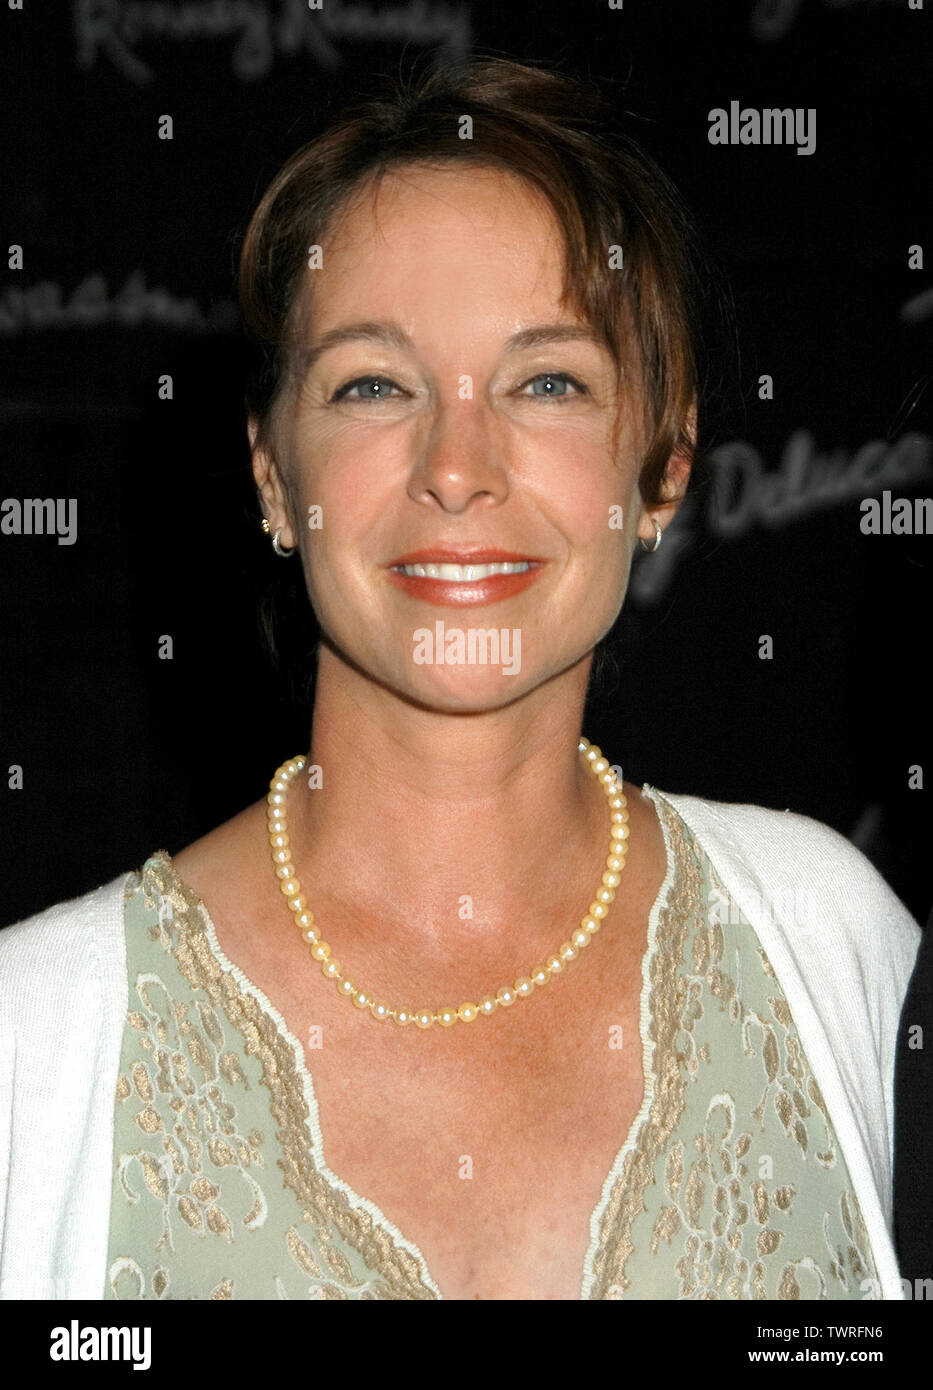 Kathleen Quinlan at The Smothers Brothers performance benefiting Children of the Night at the Comedy Store in West Hollywood, CA. The event took place on Thursday, July 31, 2003.  Photo credit: SBM / PictureLux File Reference # 33790-2837SMBPLX  For Editorial Use Only -  All Rights Reserved Stock Photo